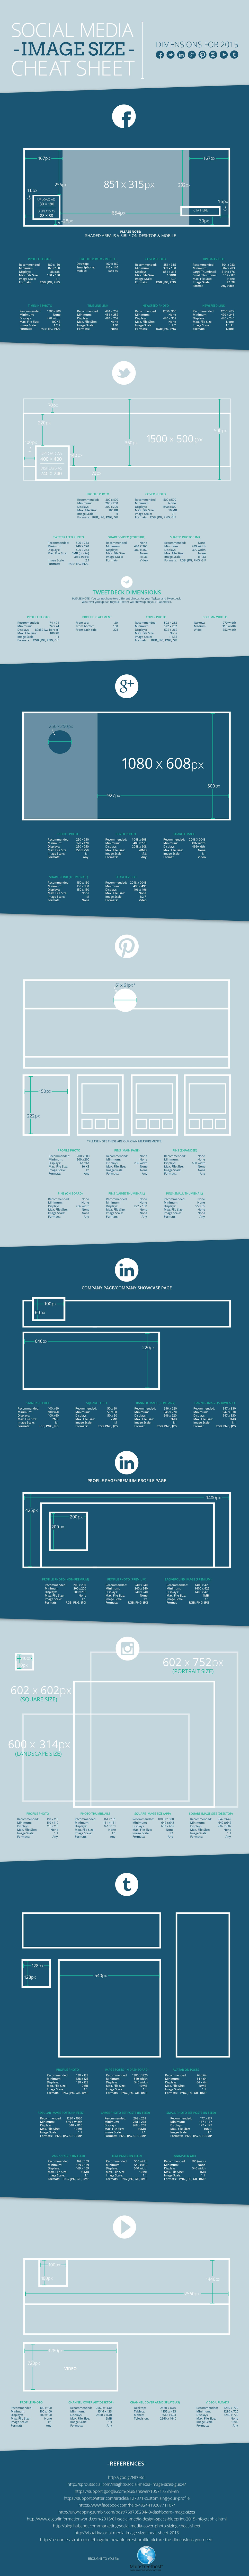 Social Media Image Size Cheat Sheet with Dimension Changes for 2015 #infographic